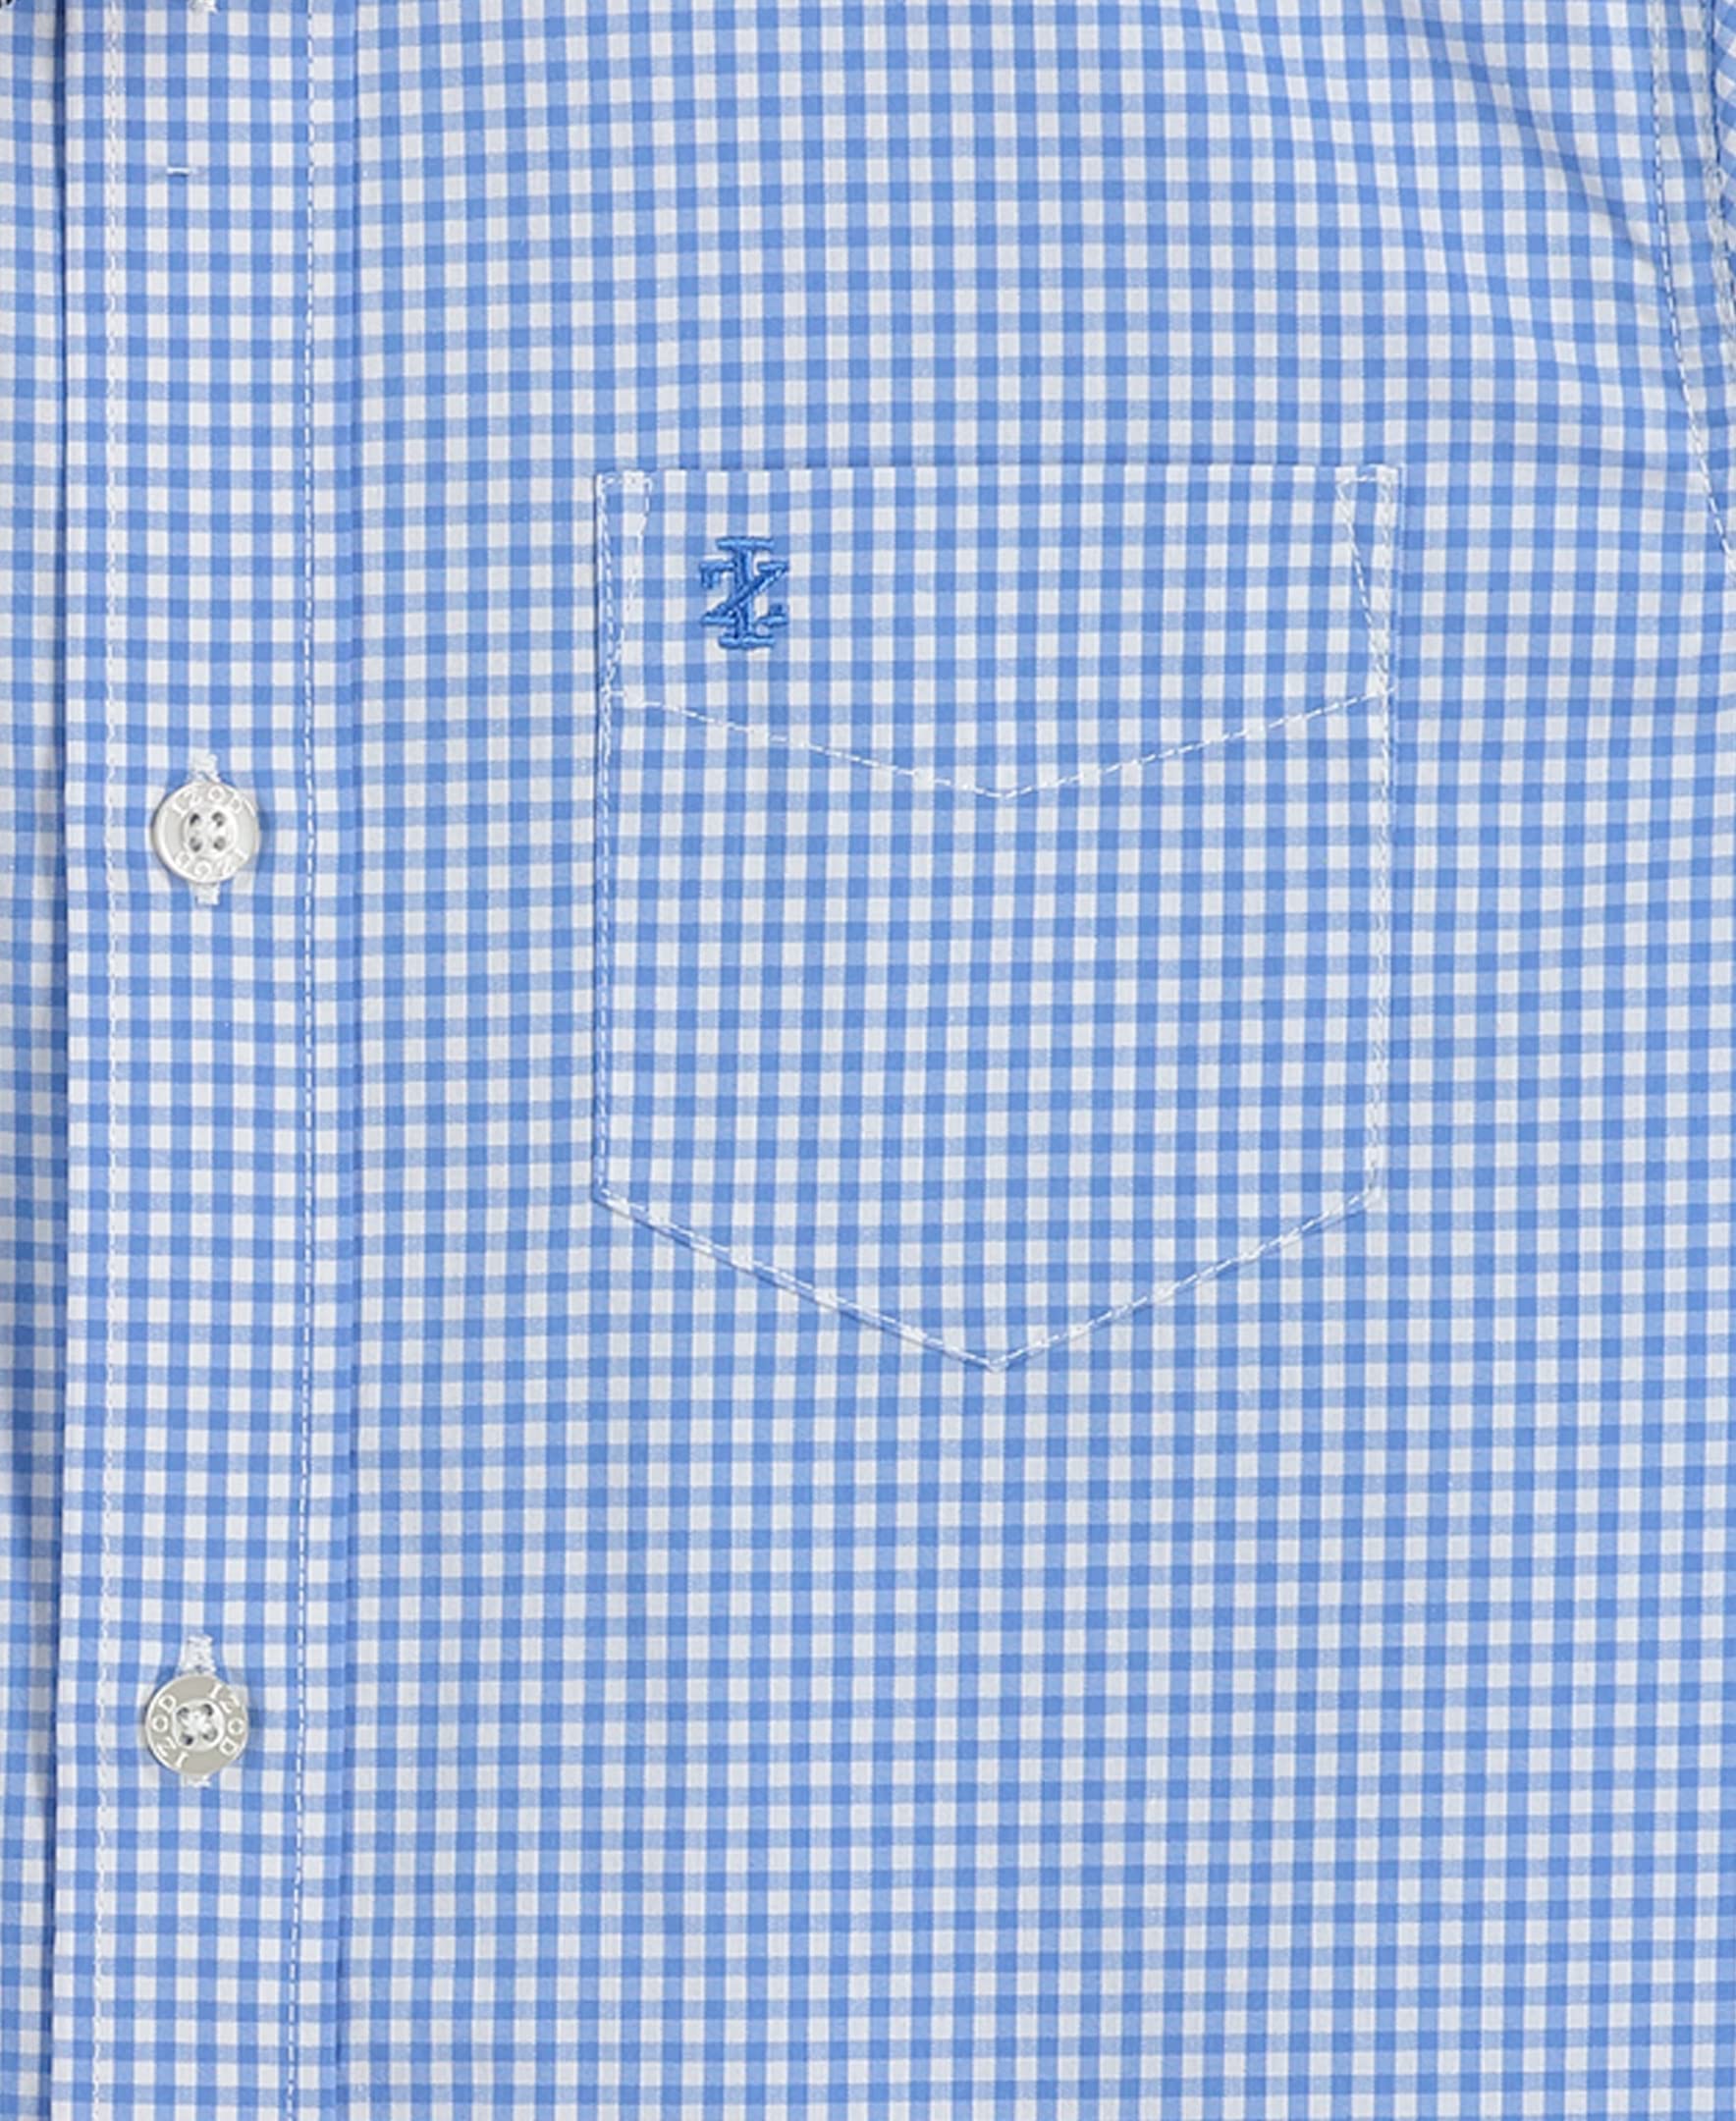 IZOD boys Long Sleeve Button-down Collared With Tie and Chest Pocket Dress Shirt, Dragonfly, 12 US